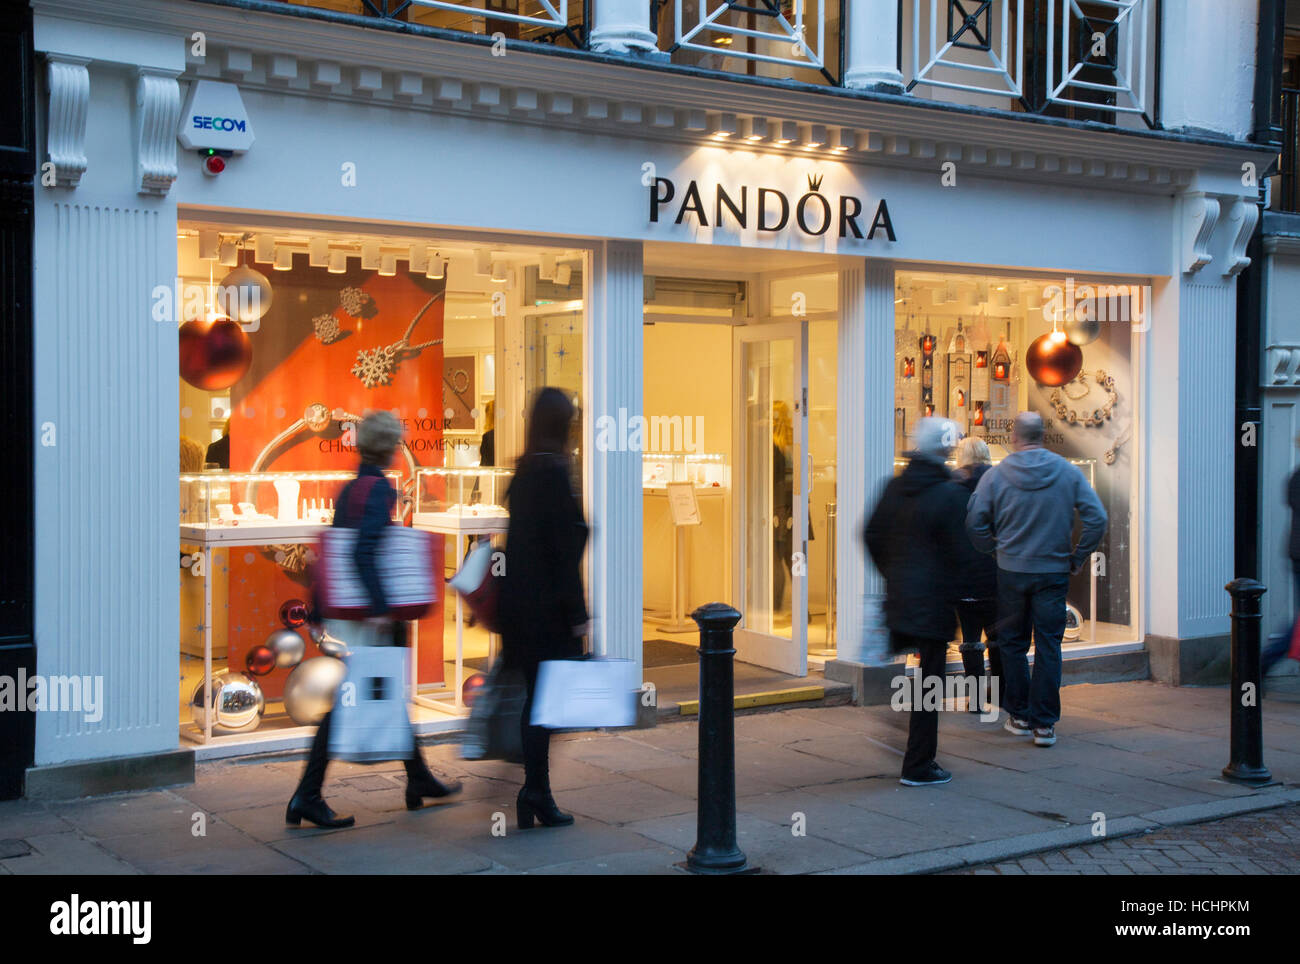 Pandora Jewelry High Resolution Stock Photography and Images - Alamy